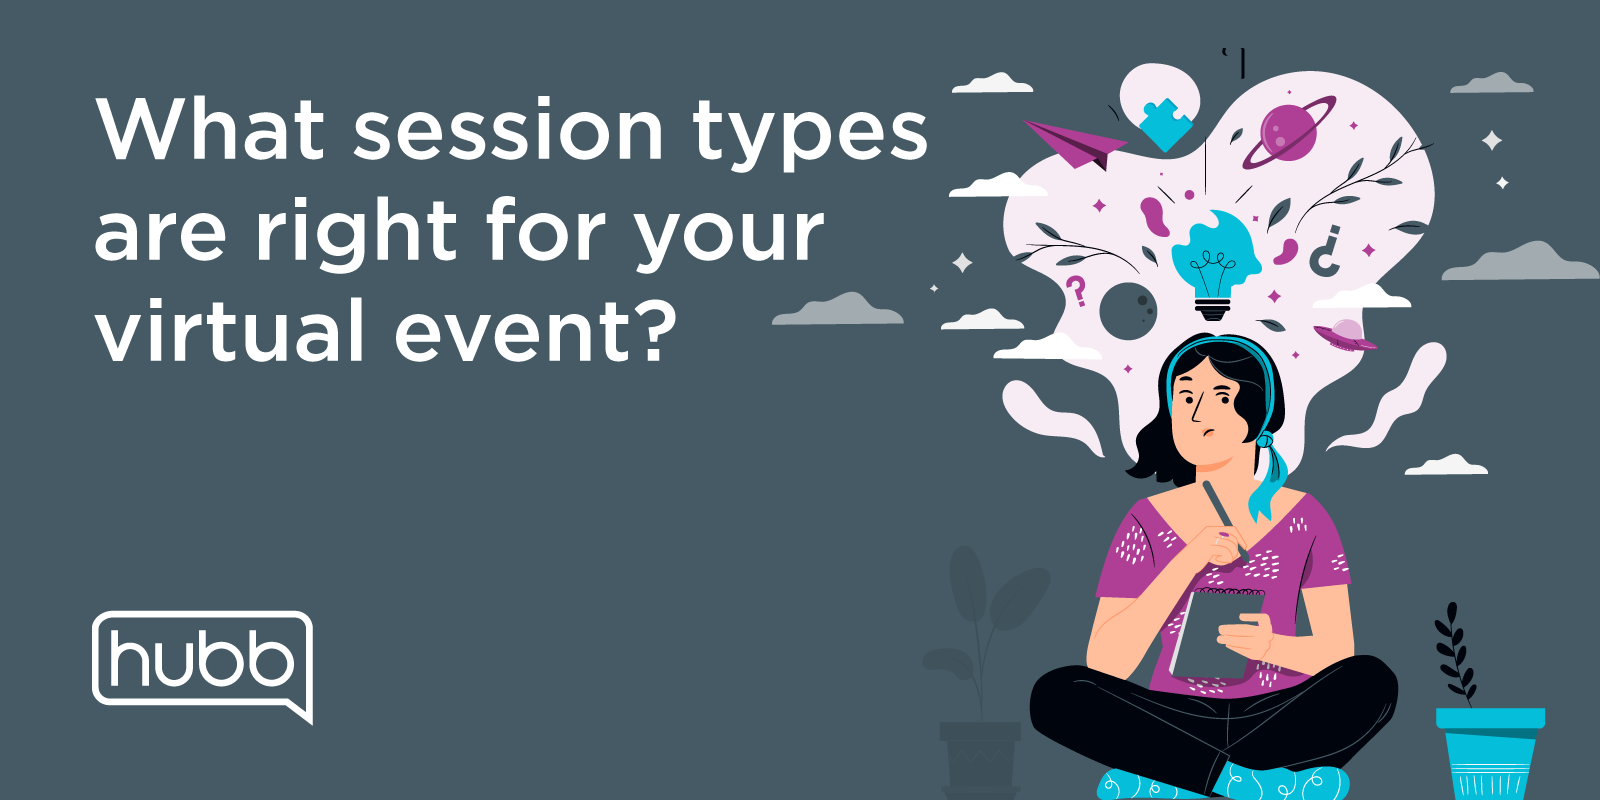 What session types are right for your virtual event?